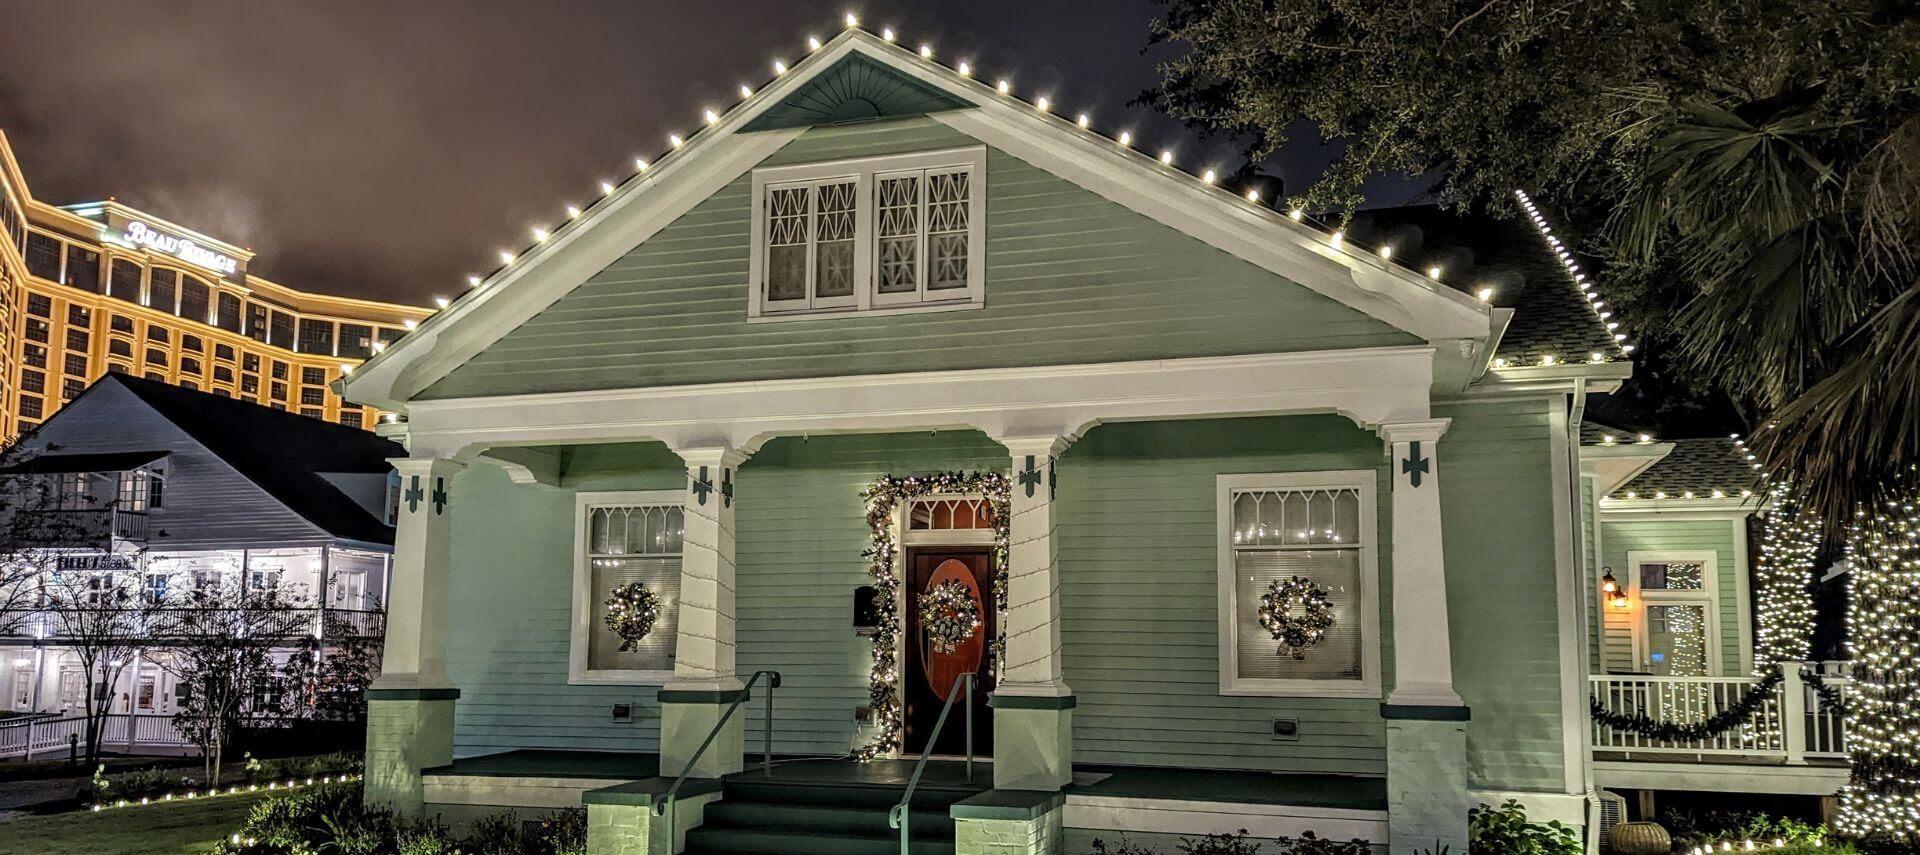 A green 2-story Victorian house with white trim and pillars, light up with Christmas lights.